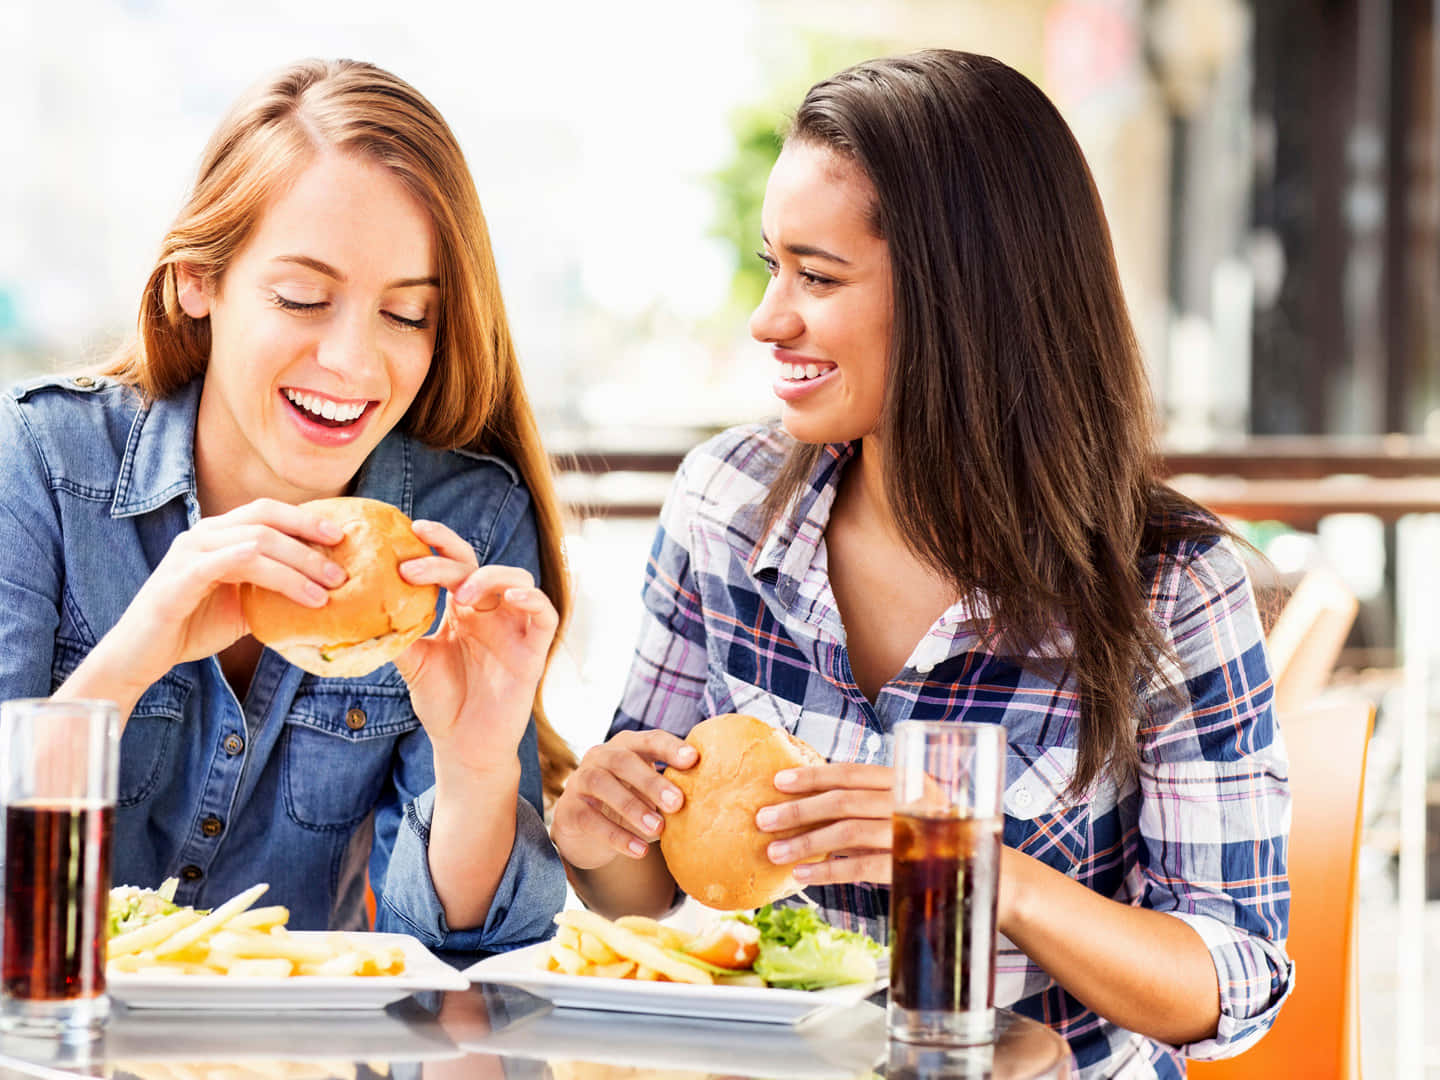 Two Women Eating Burgers And Fries In A Restaurant